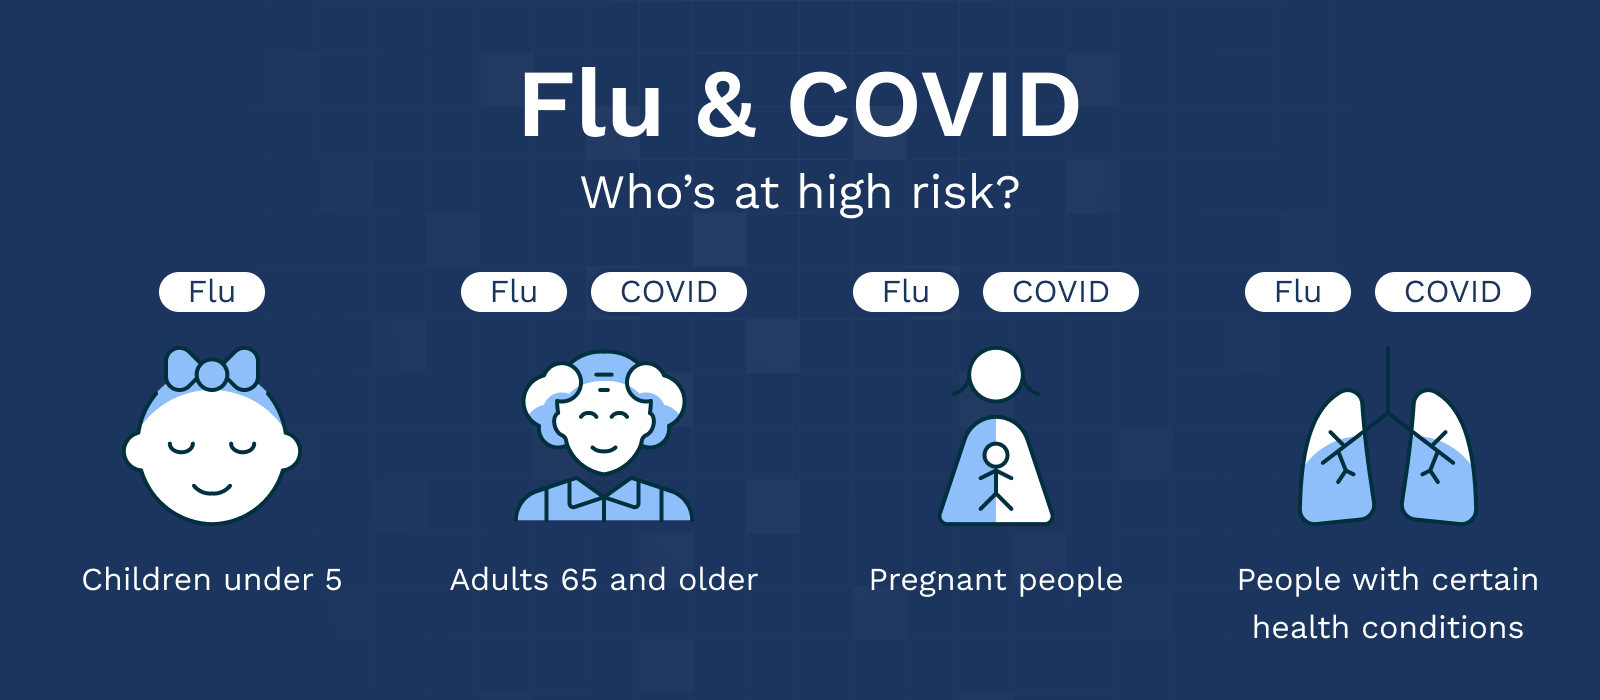 High risk for flu and COVID